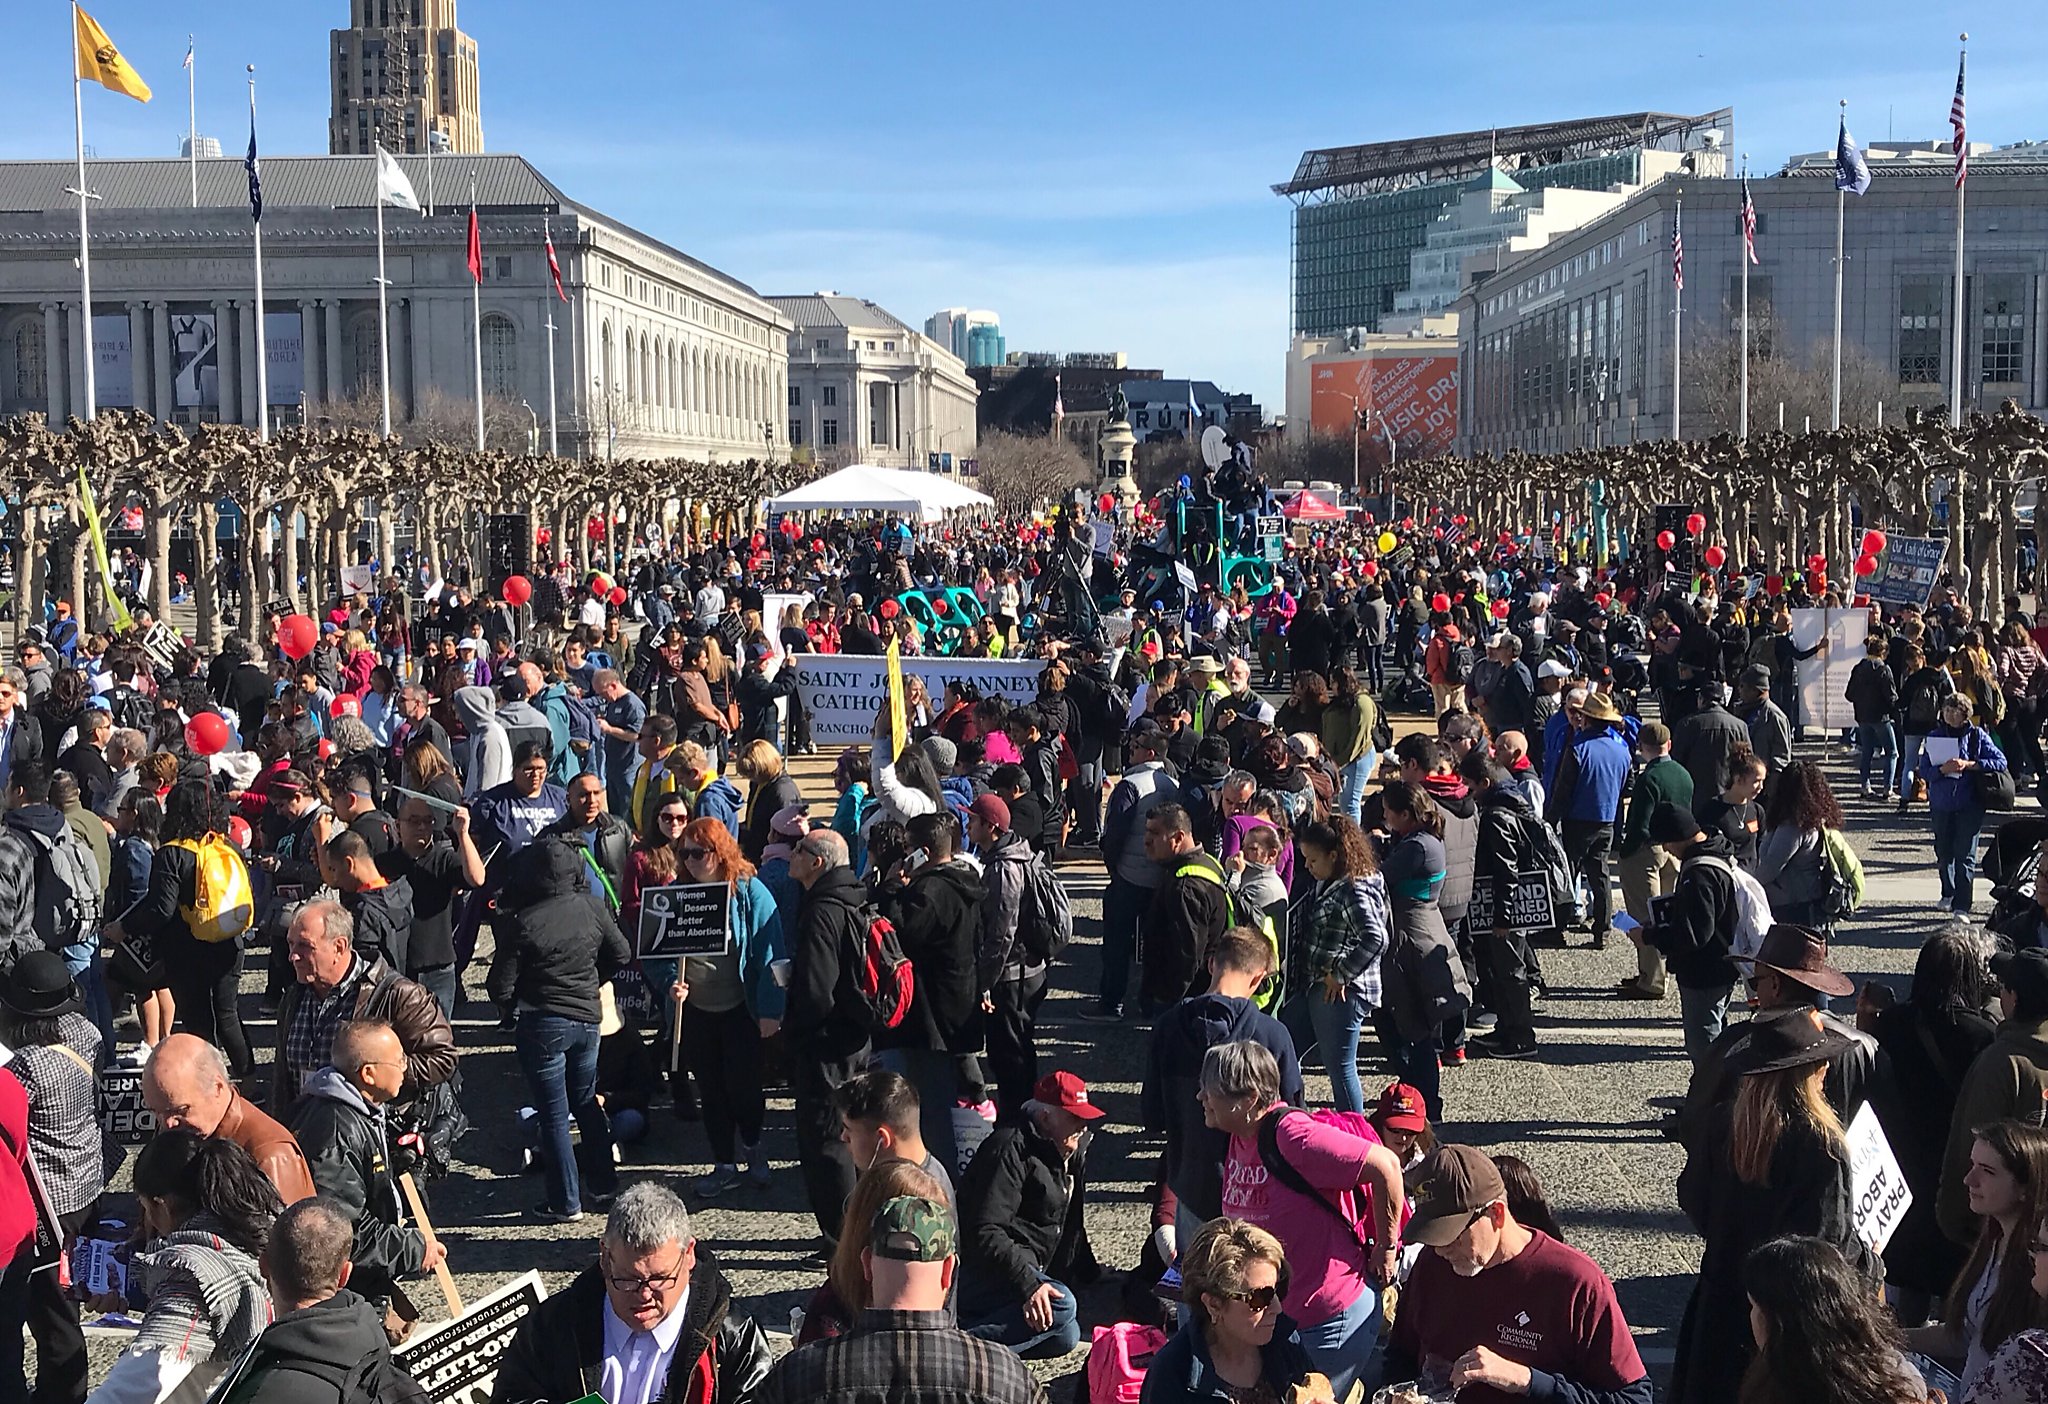 March for Life brings huge crowd to SF streets